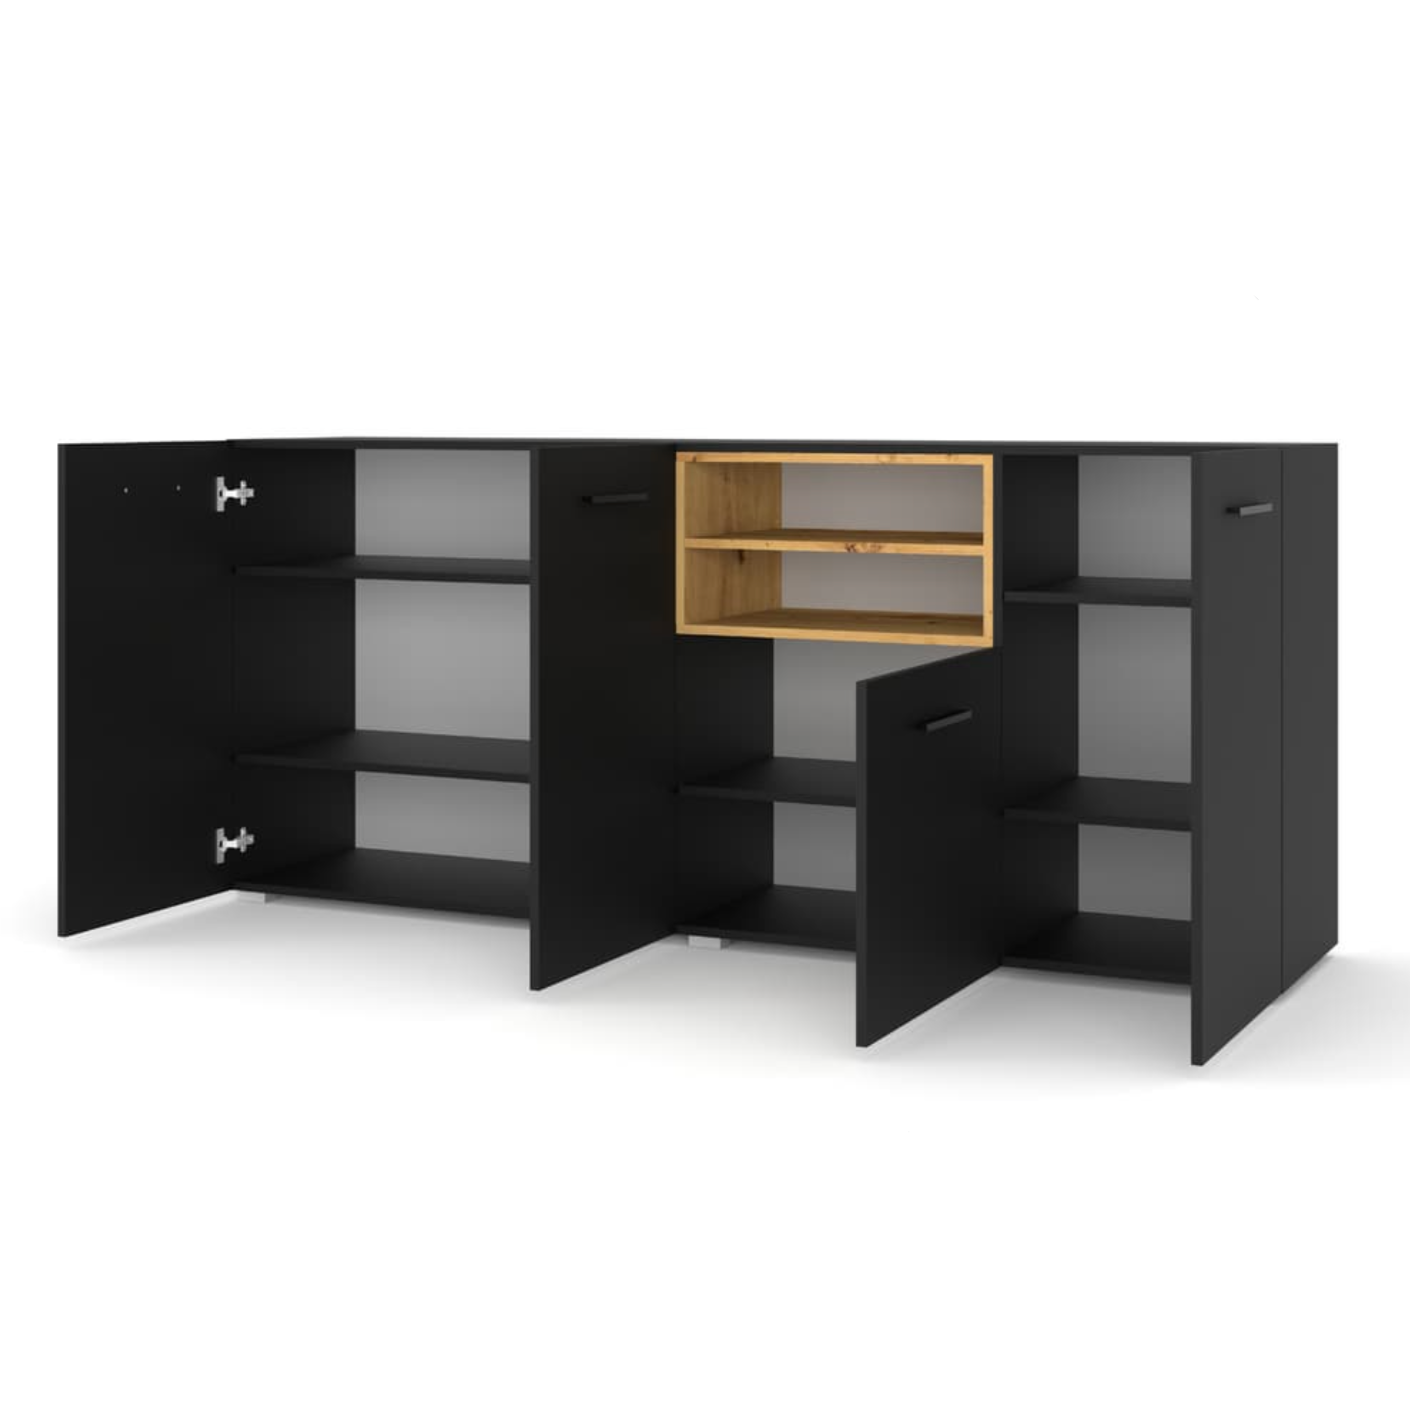 Anette Sideboard Cabinet 198cm